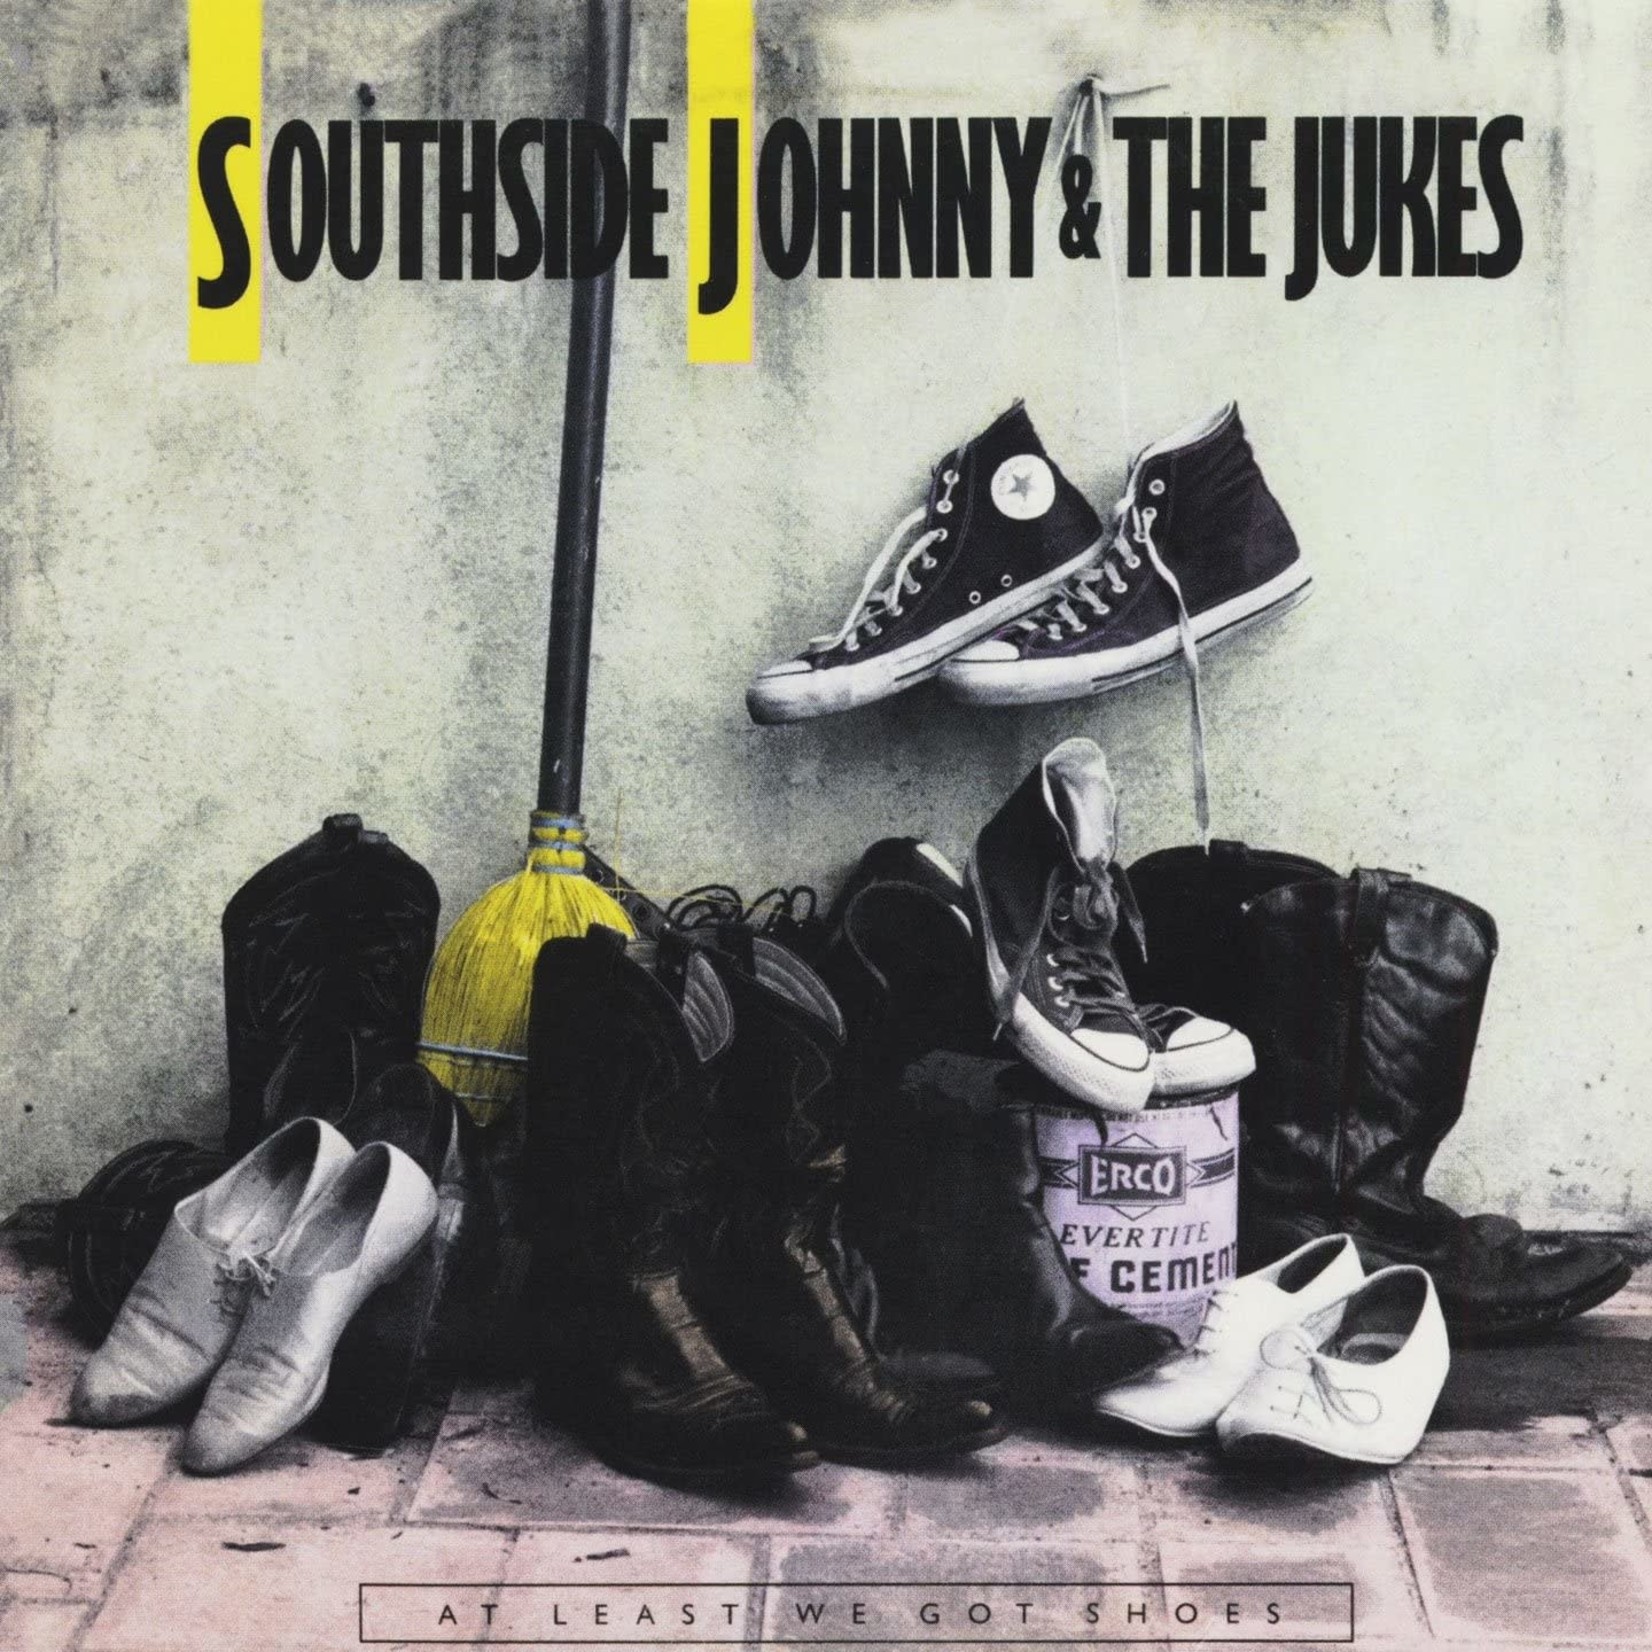 Southside Johnny And The Jukes - At Least We Got Shoes [CD]